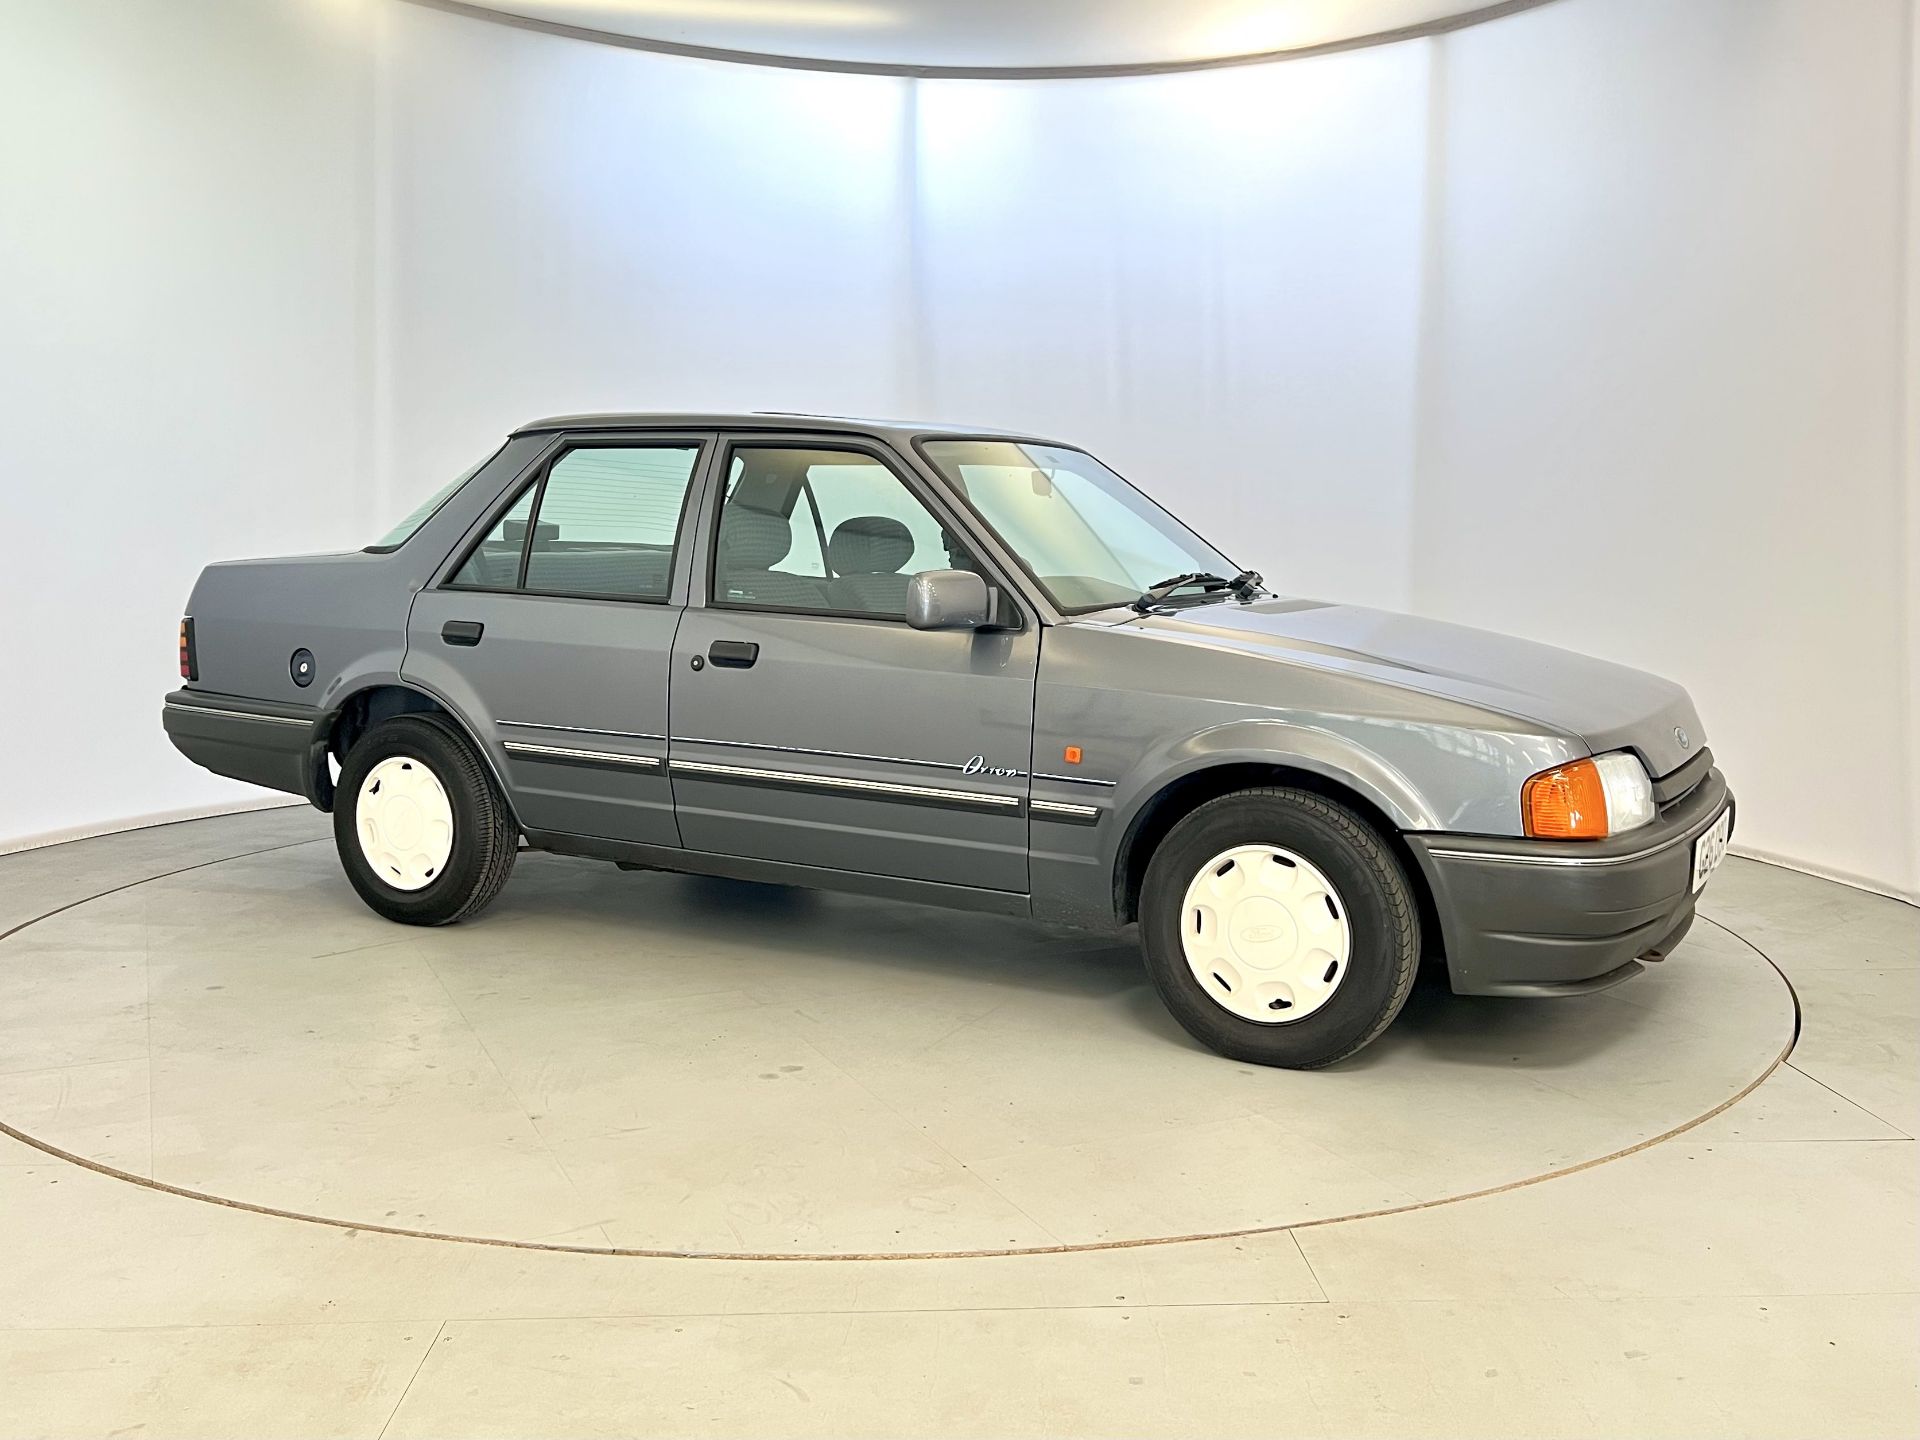 Ford Orion DX - Image 12 of 34